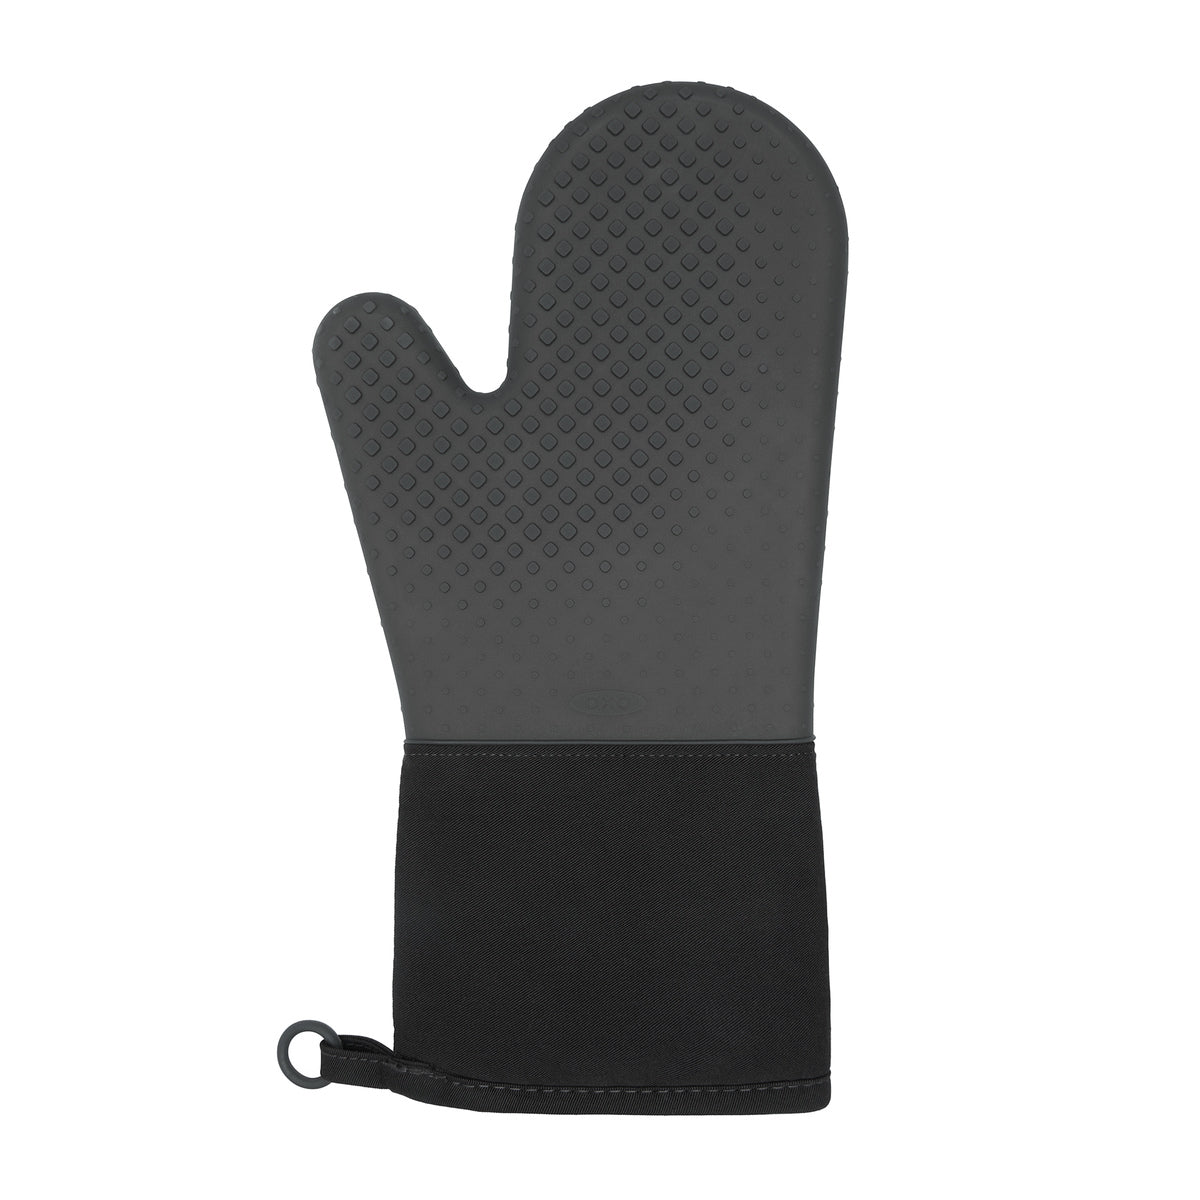 All-Clad Set of 2 Oven mitts silicone.